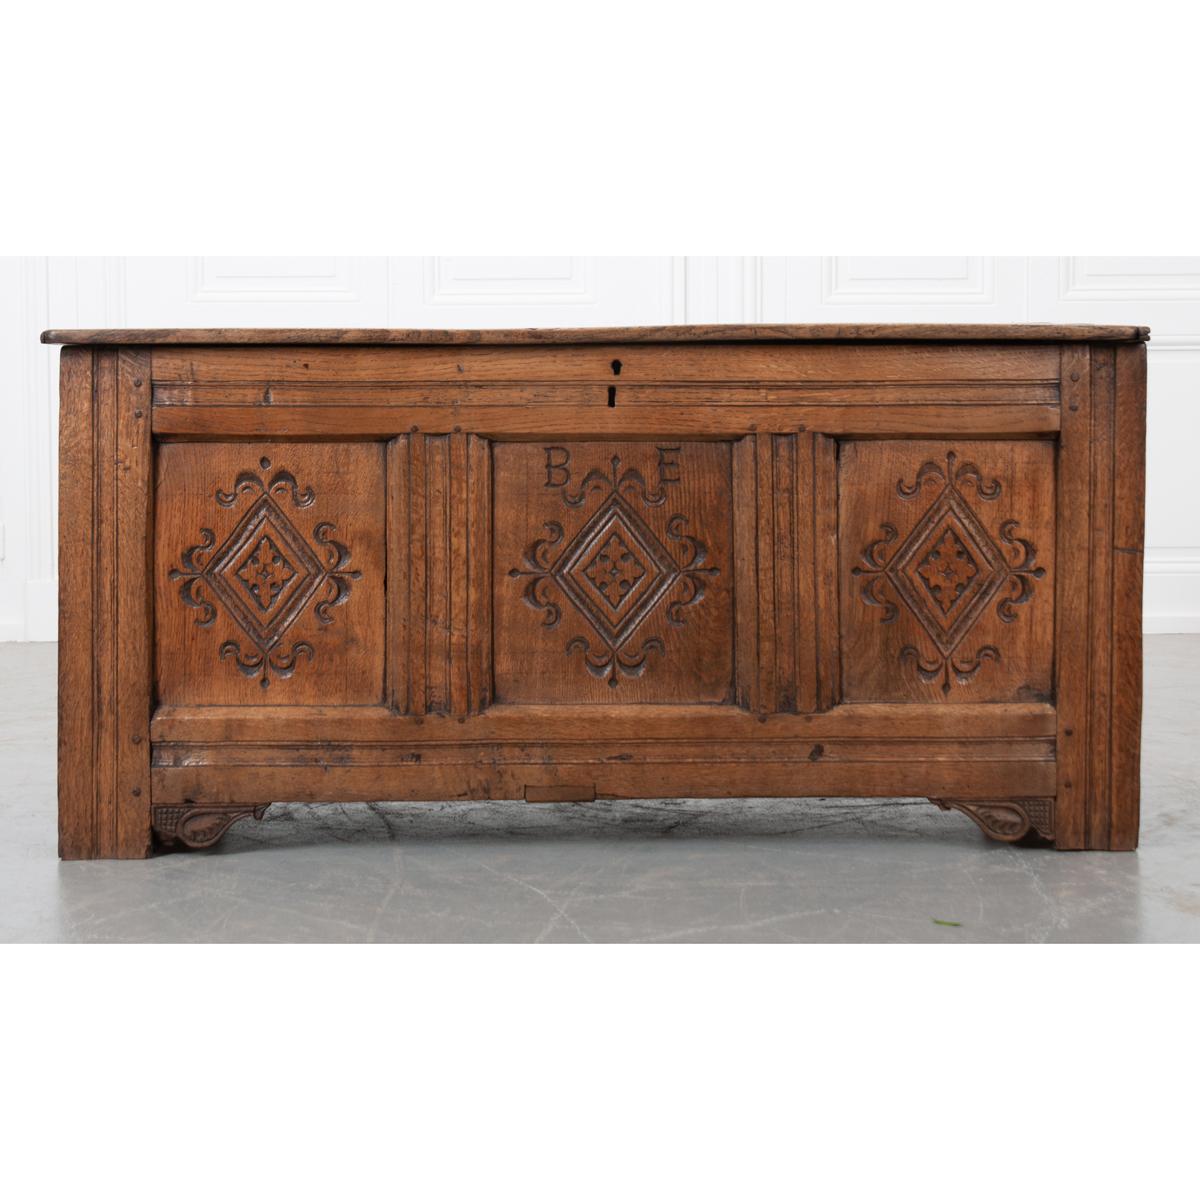 A gorgeous oak coffer or trunk from the 1700s, England. The front façade has three panels that have been meticulously carved into identical patterns with additional carvings at the base. The center panel has the initials ‘B.E.’ carved into the top,